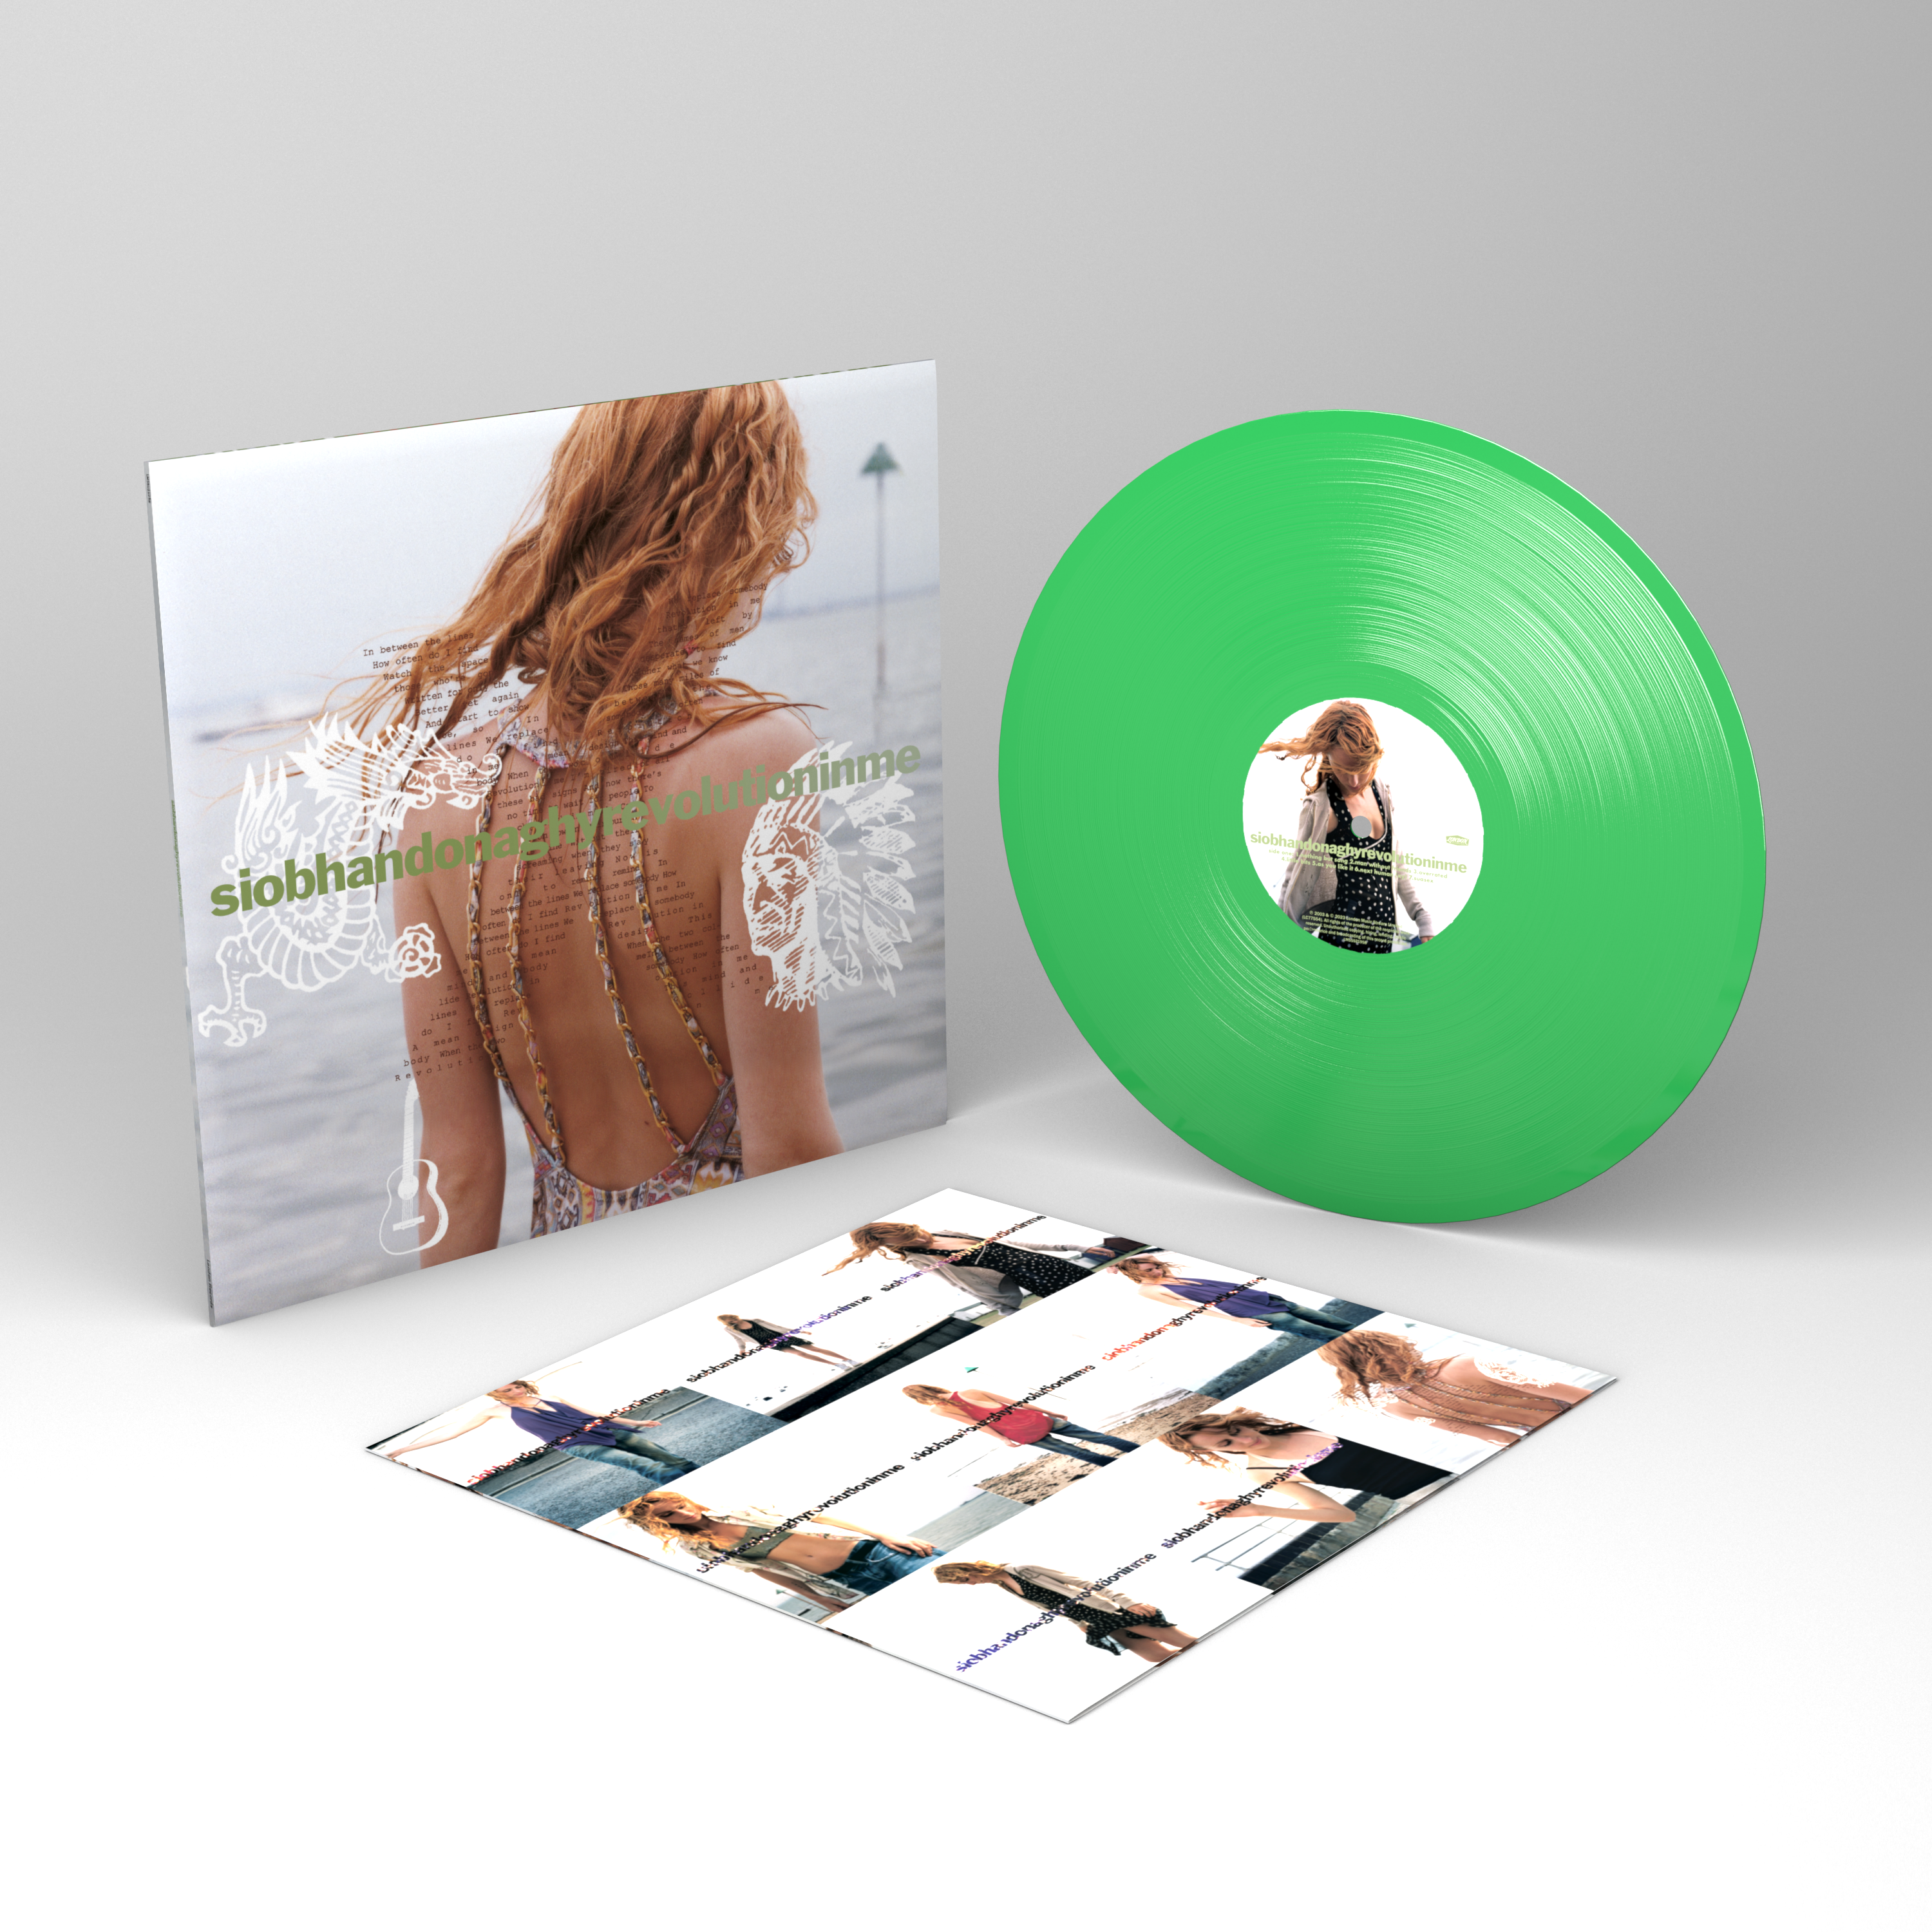 Siobhan Donaghy - Revolution in Me: Limited Green Vinyl LP